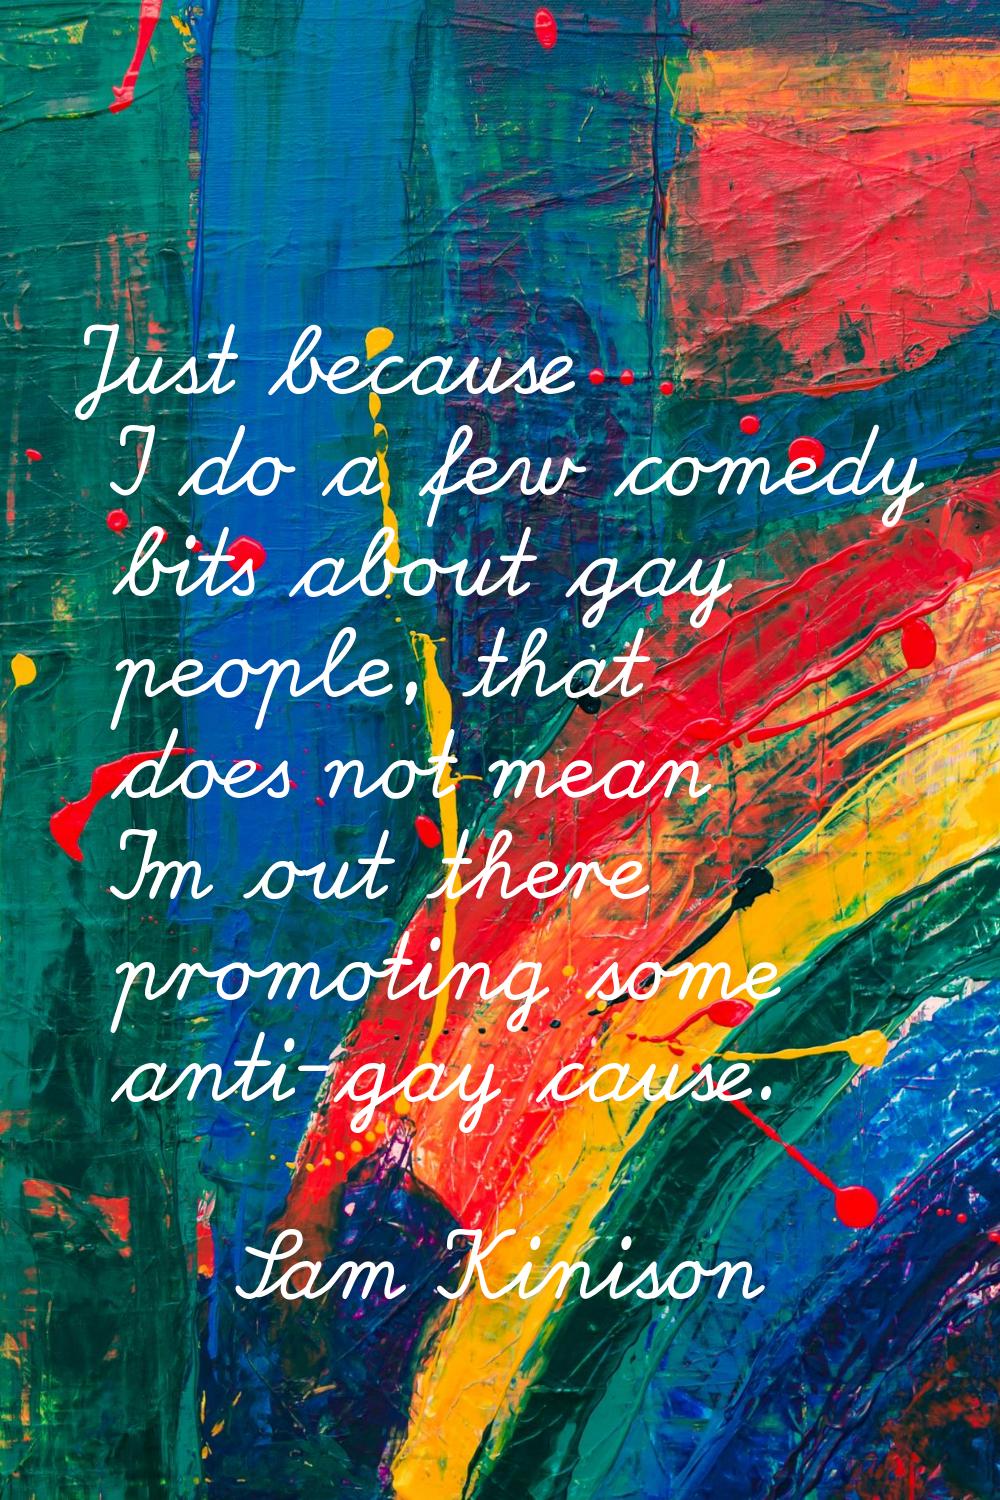 Just because I do a few comedy bits about gay people, that does not mean I'm out there promoting so